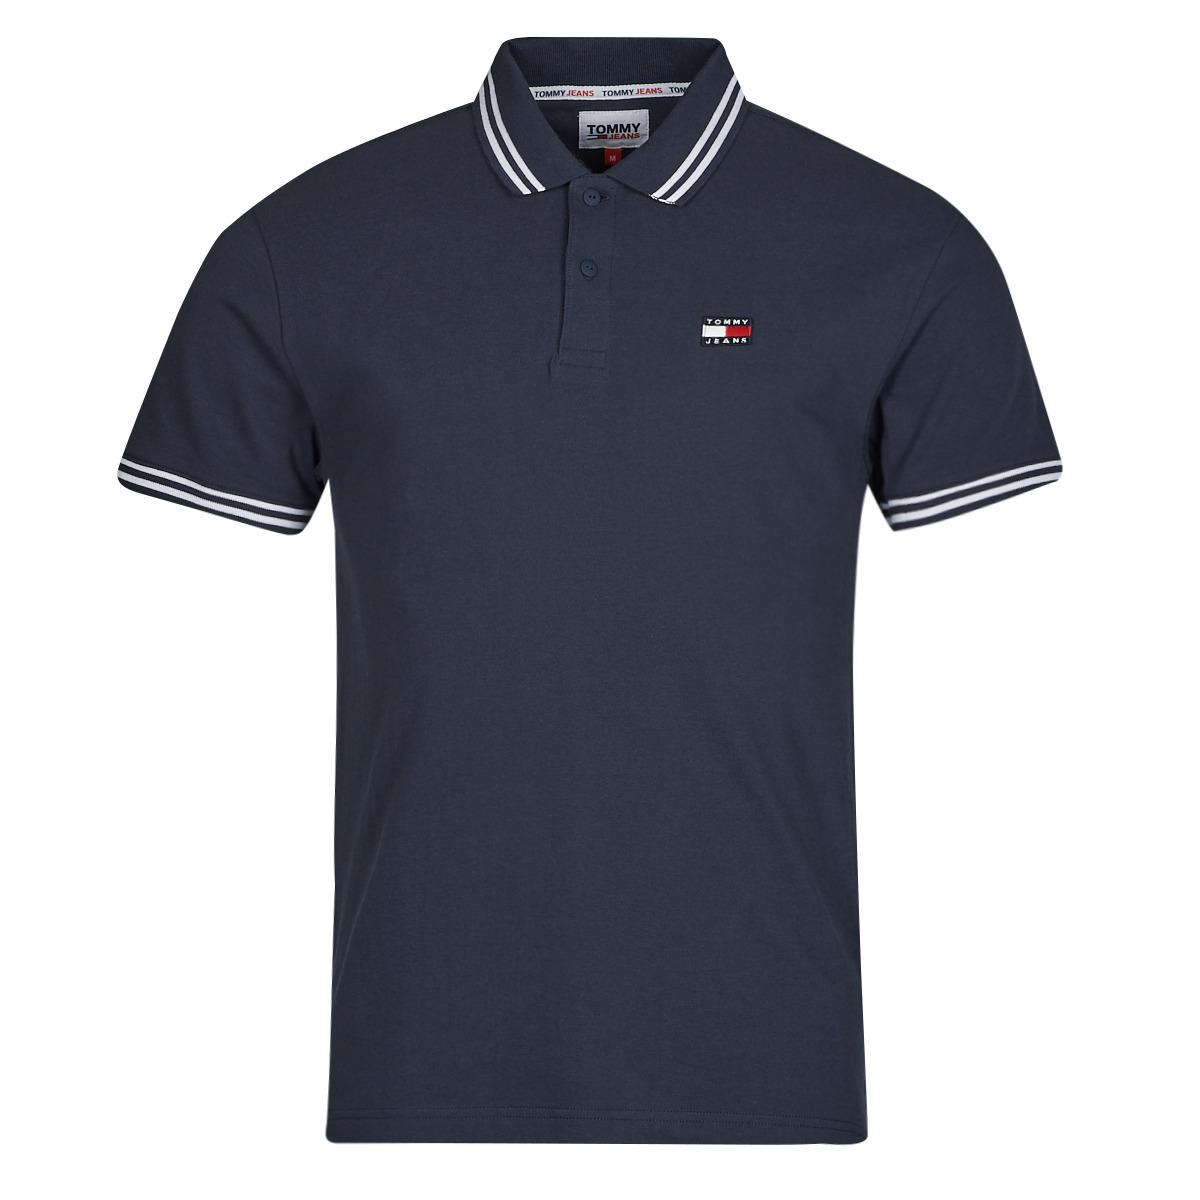 Tommy Jeans TJM CLSC TIPPING Free | delivery POLO Clothing shirts ! DETAIL - - Marine Spartoo short-sleeved NET polo Men